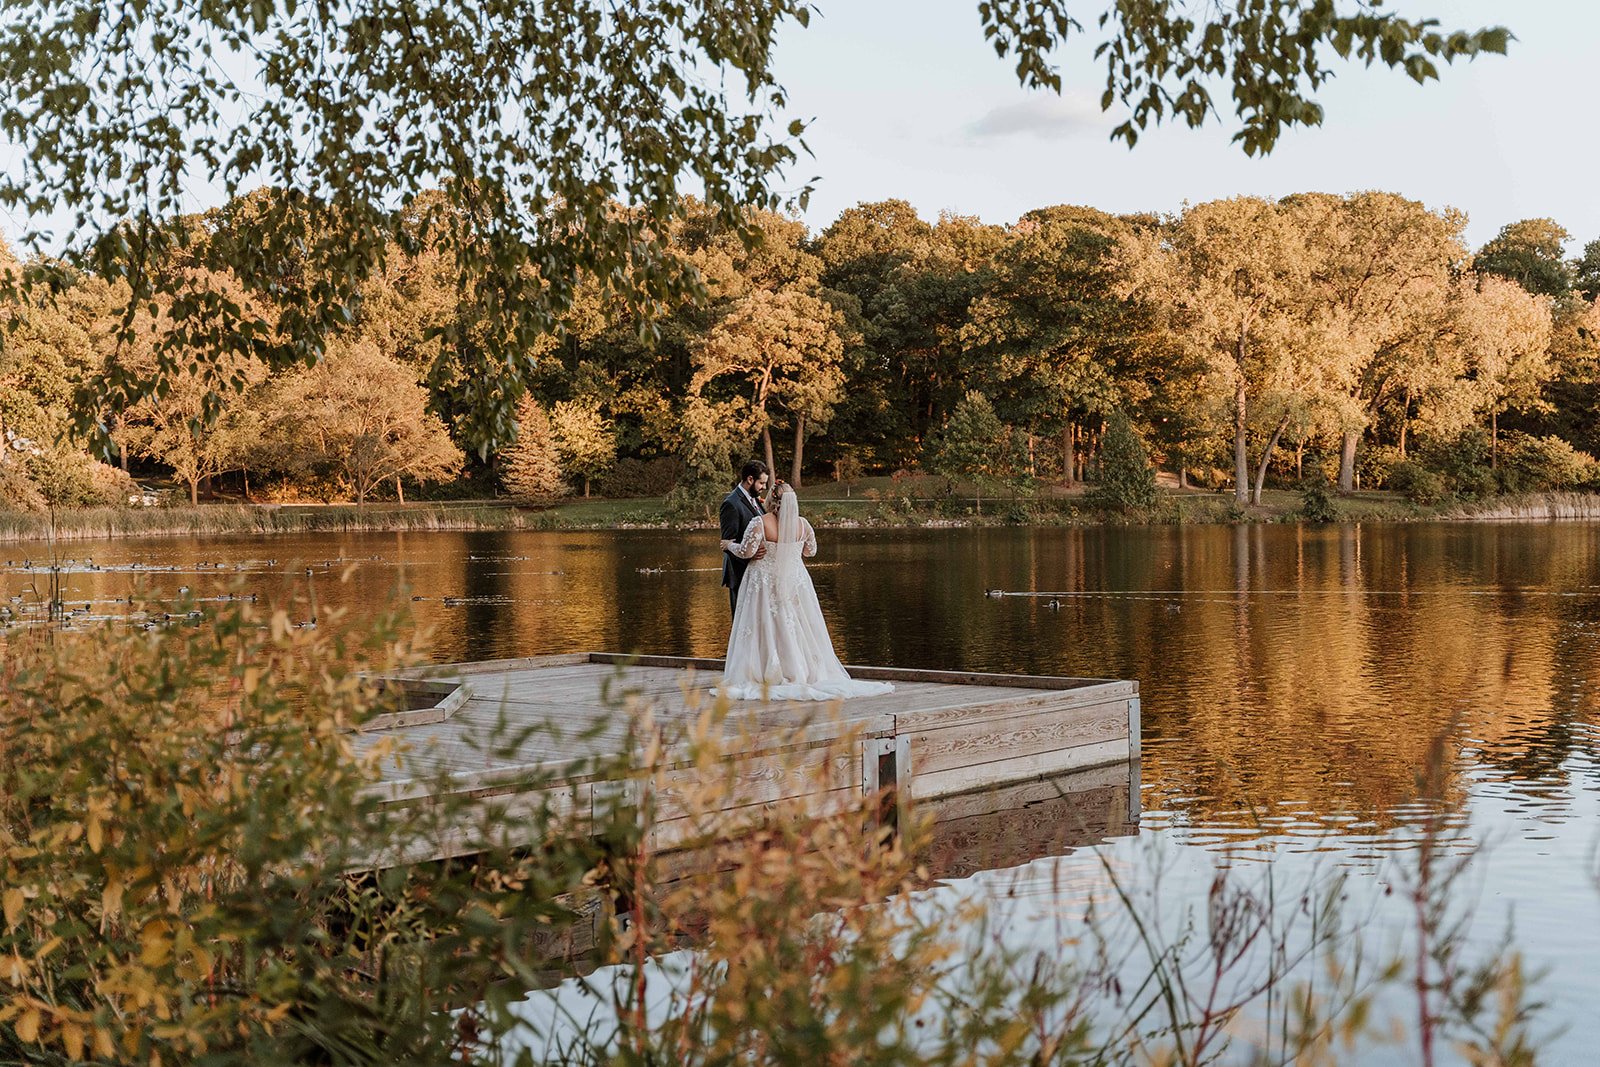 Bride and groom dance on a dock in the lake during their wedding day